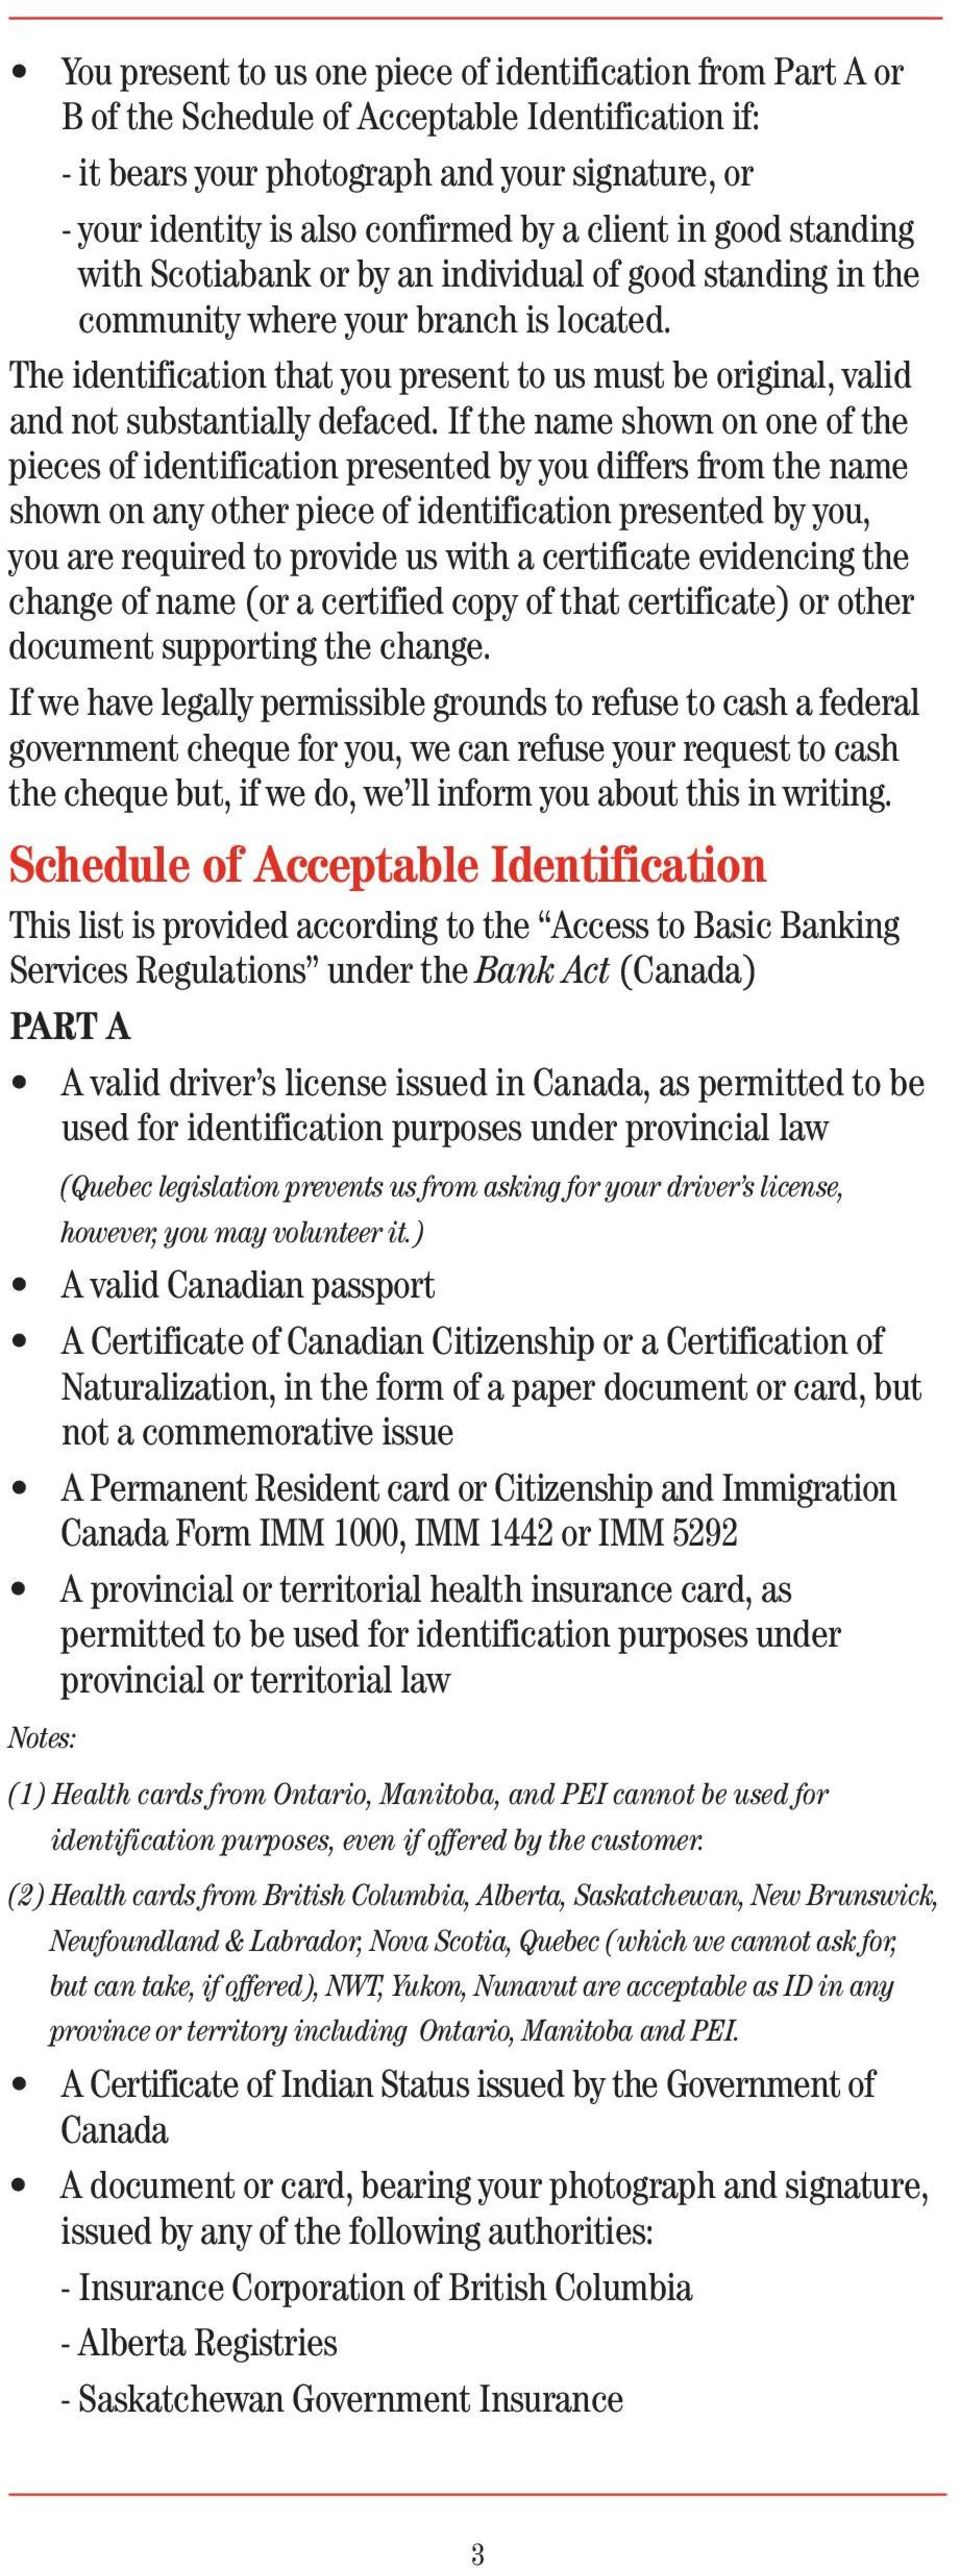 The identification that you present to us must be original, valid and not substantially defaced.